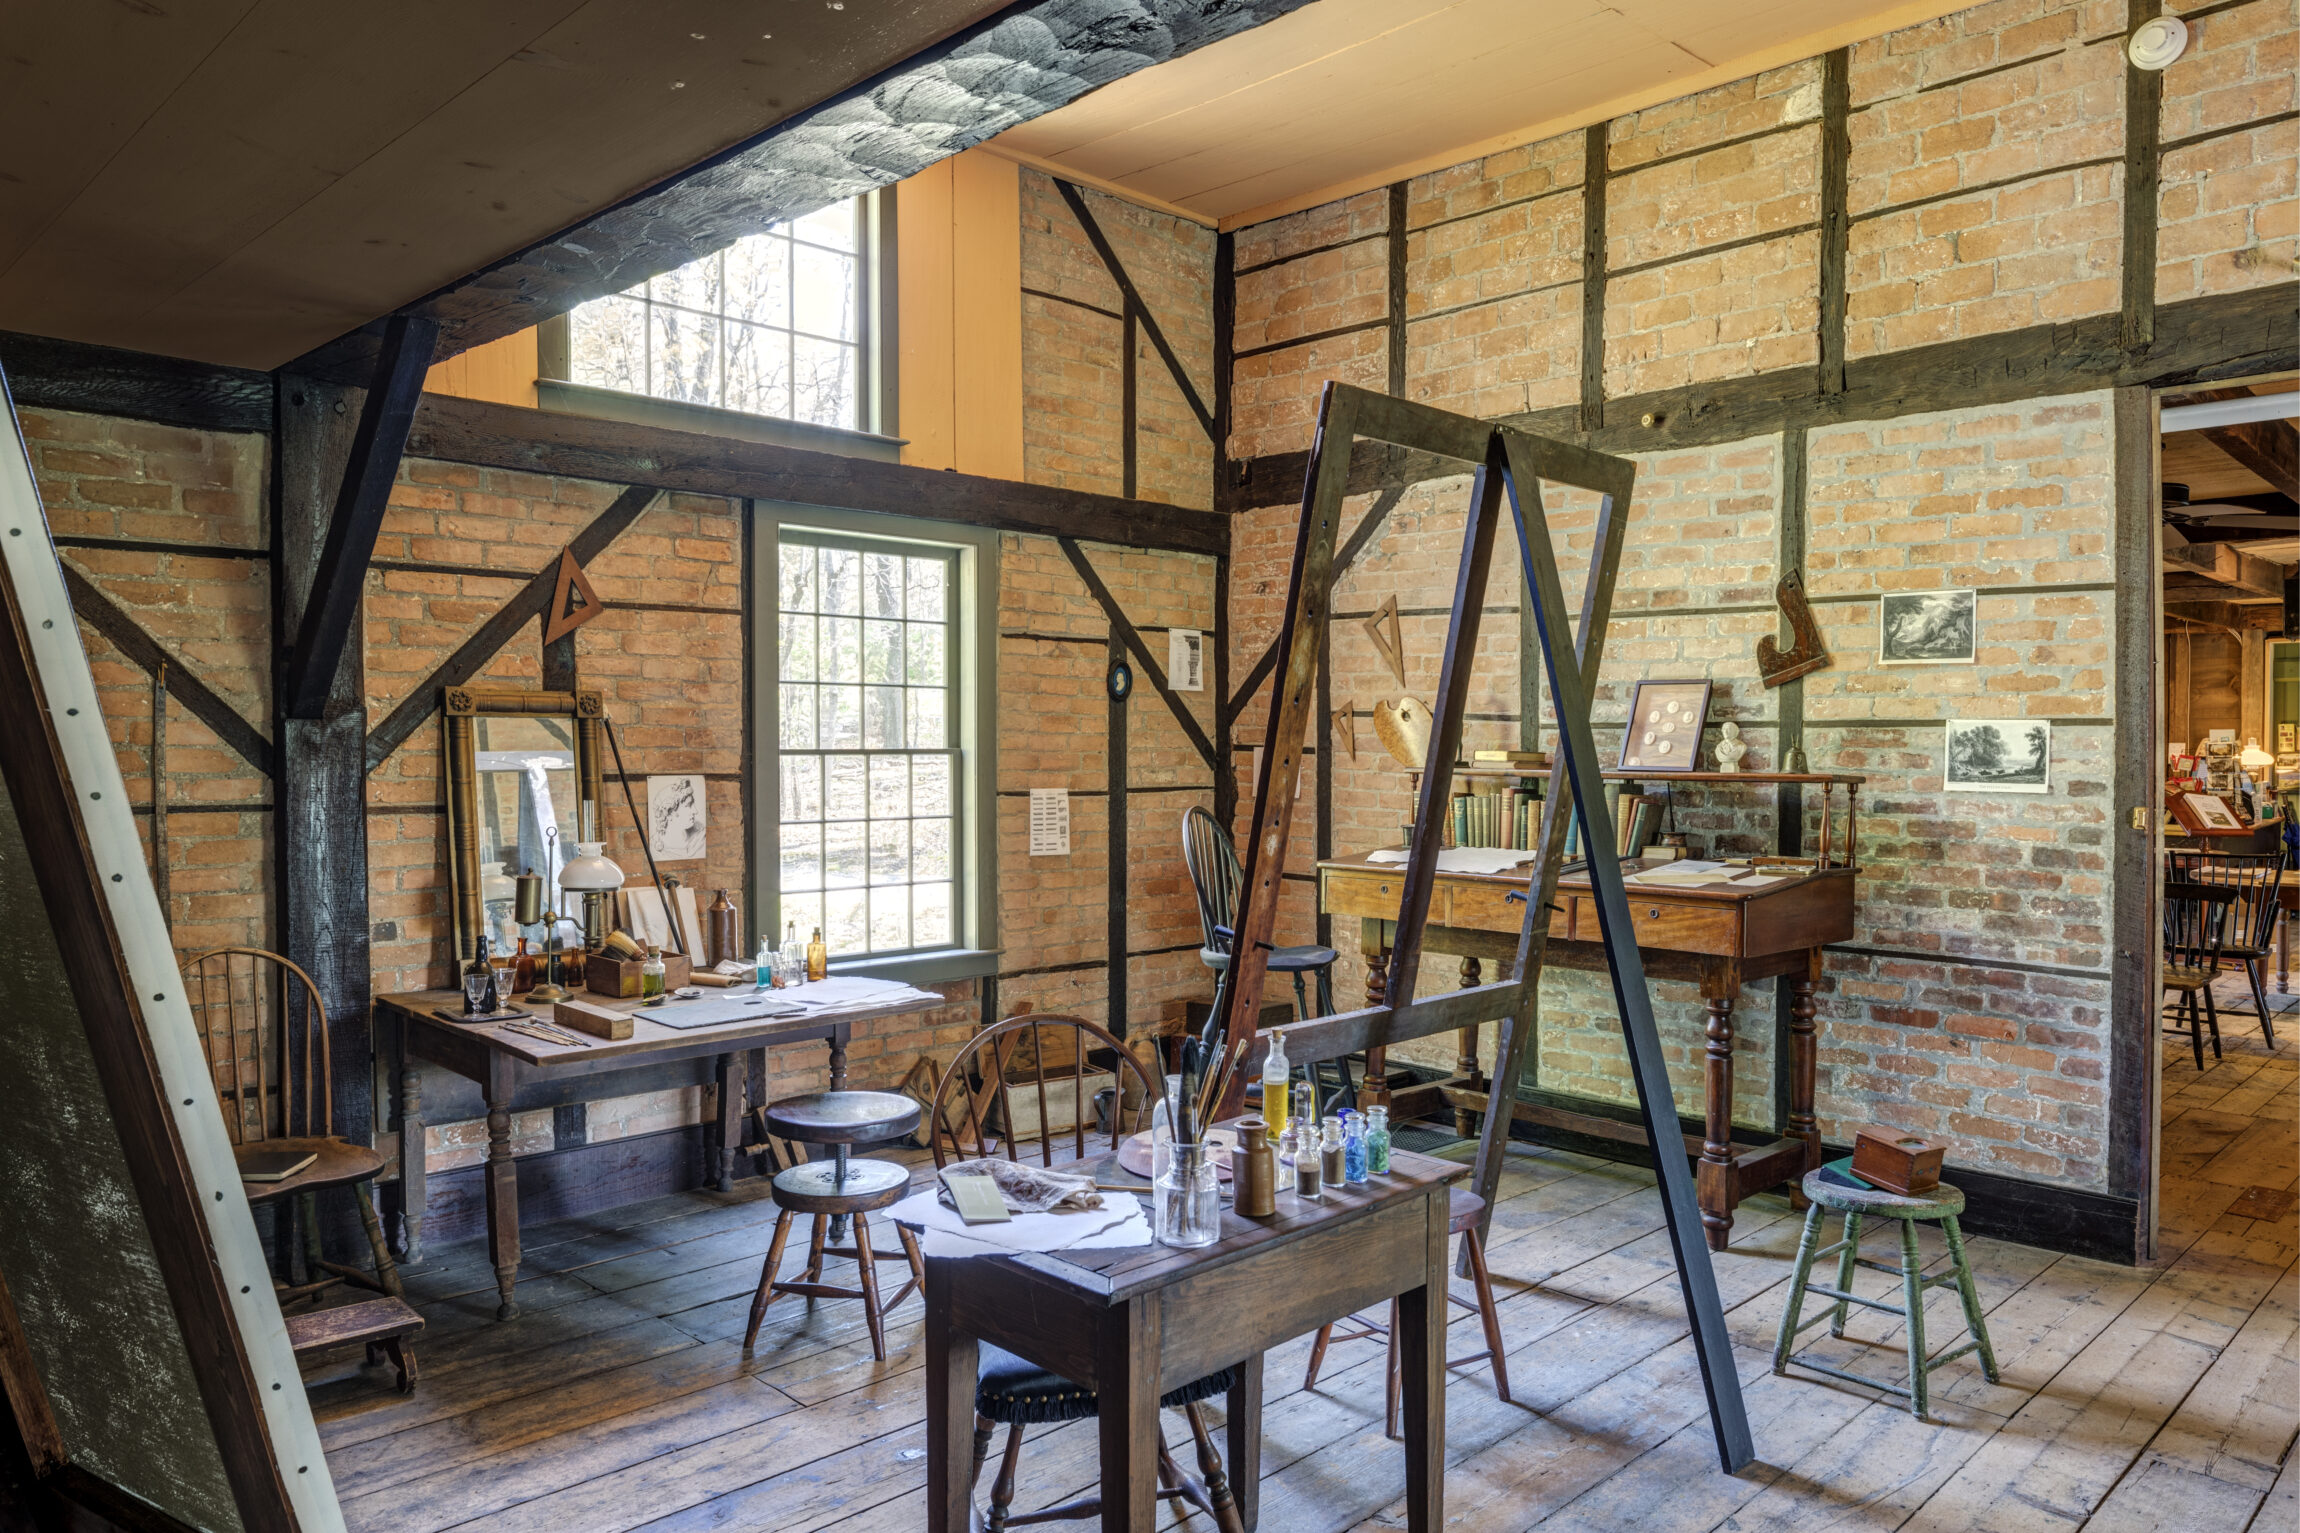 An artists studio at The Thomas Cole National Historic Site | the best things to do in the Catskills